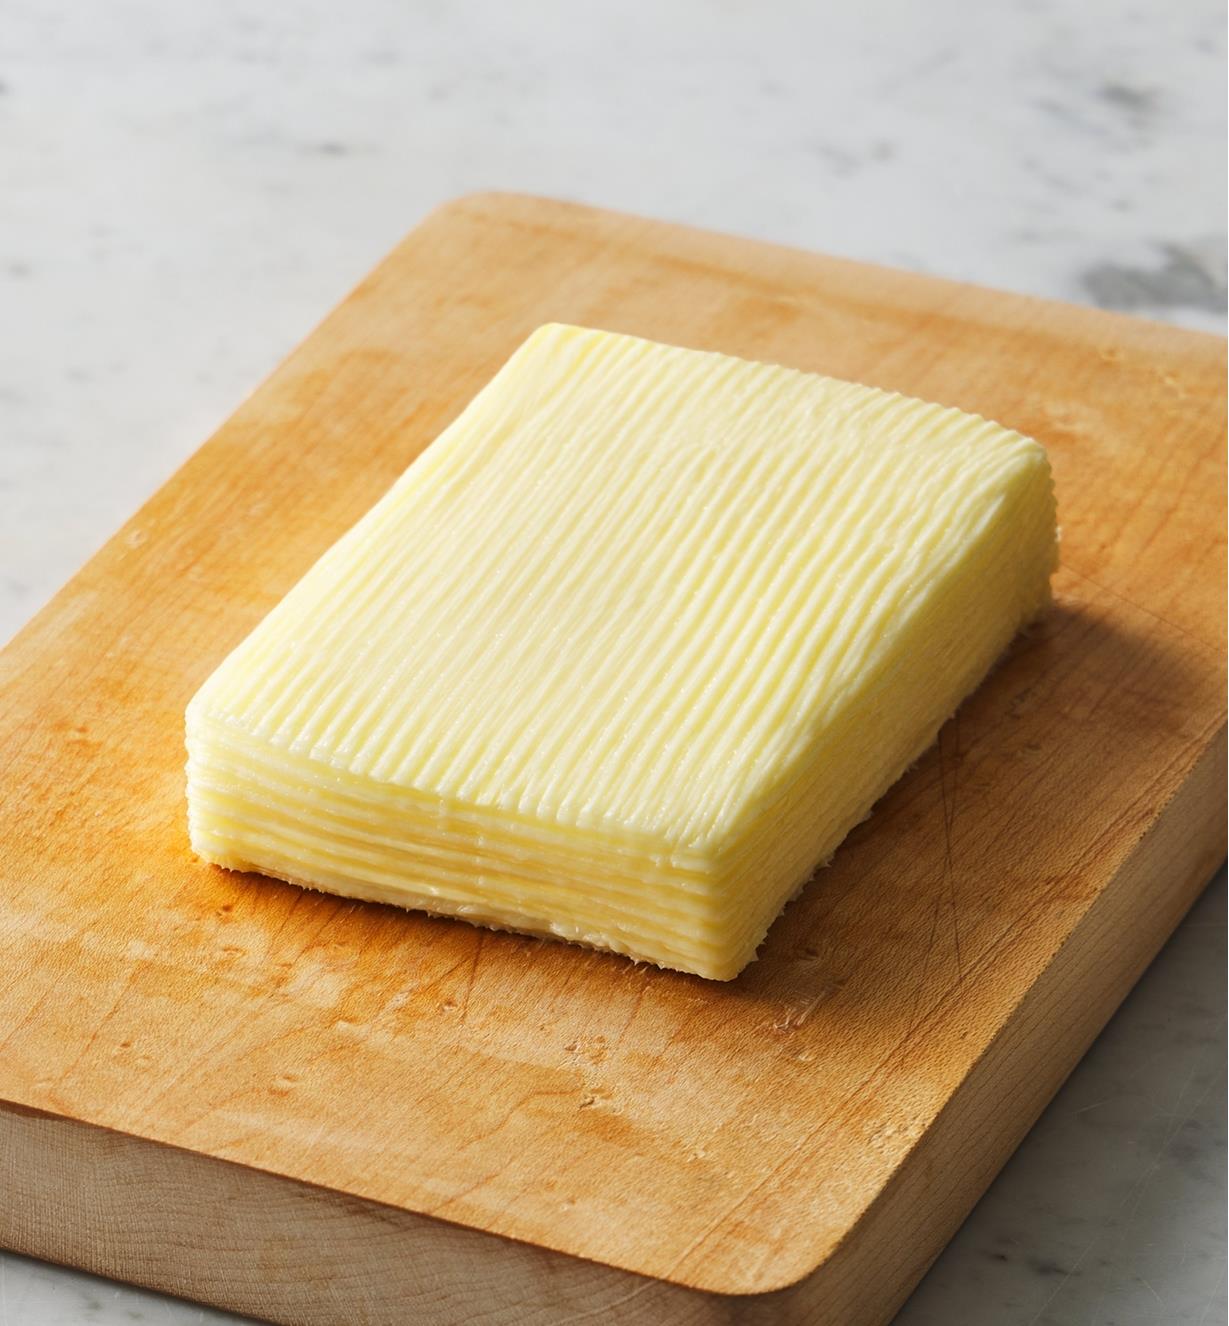 A formed brick of butter on a cutting board